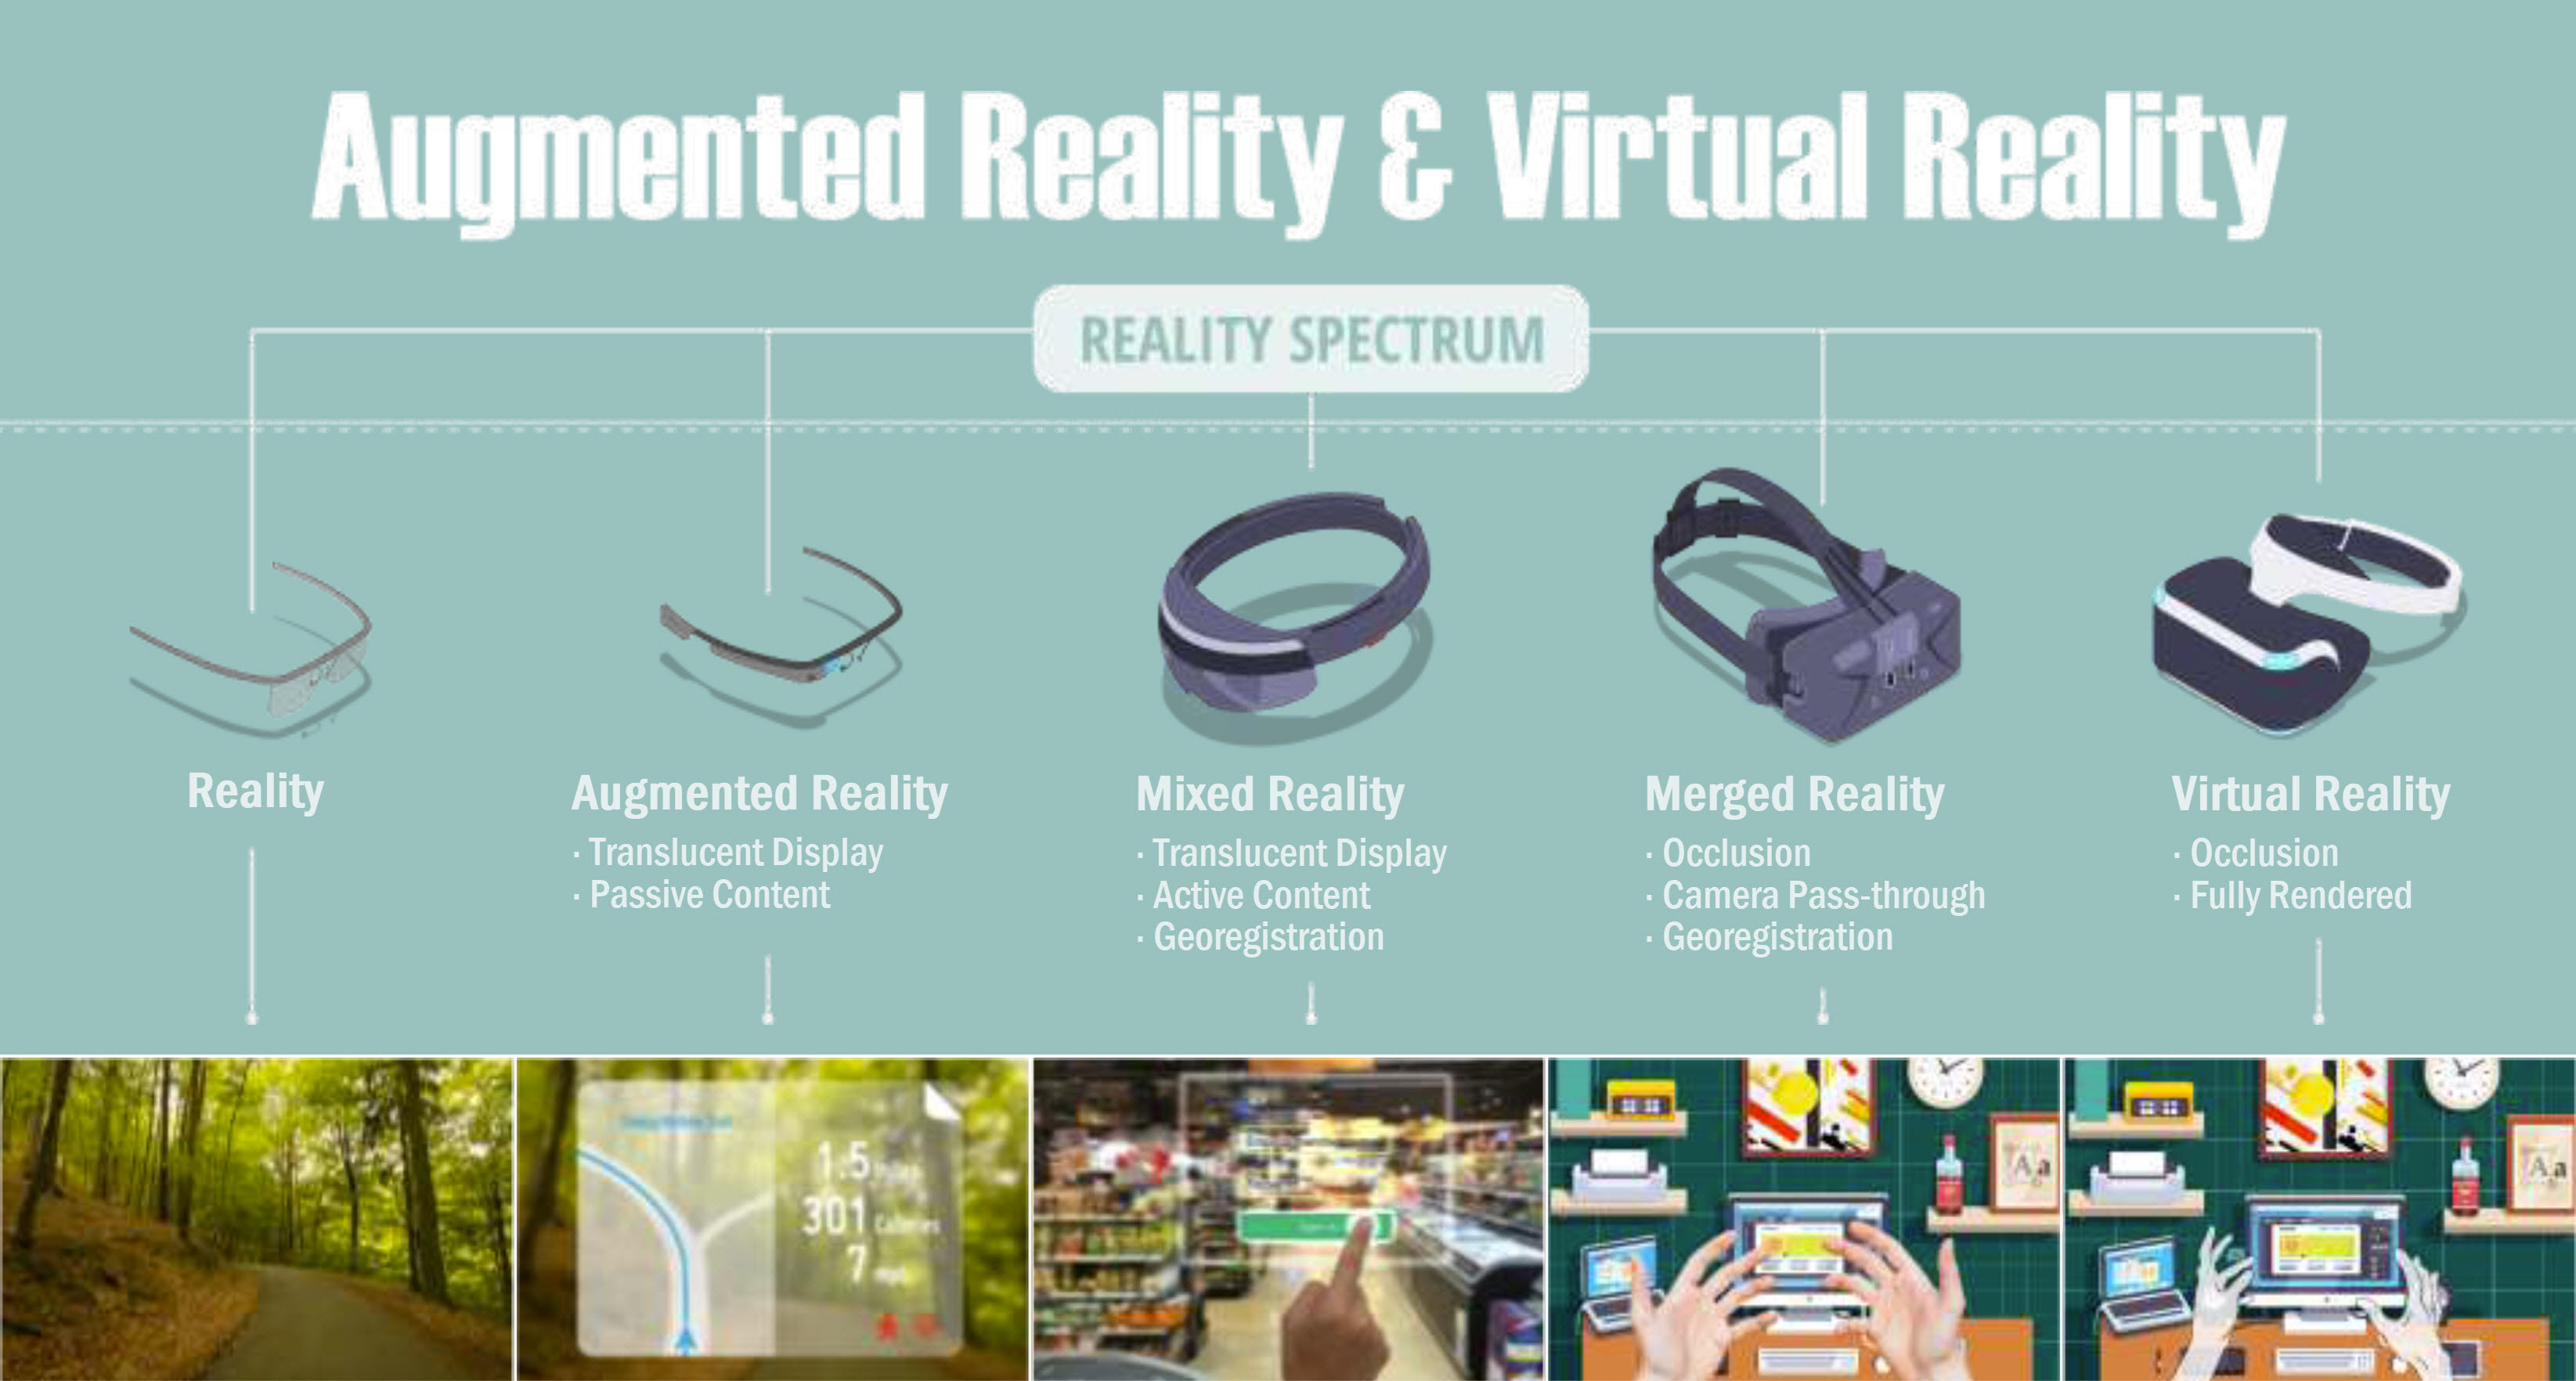 Augmented and Virtual Reality Spectrum from ABI Research